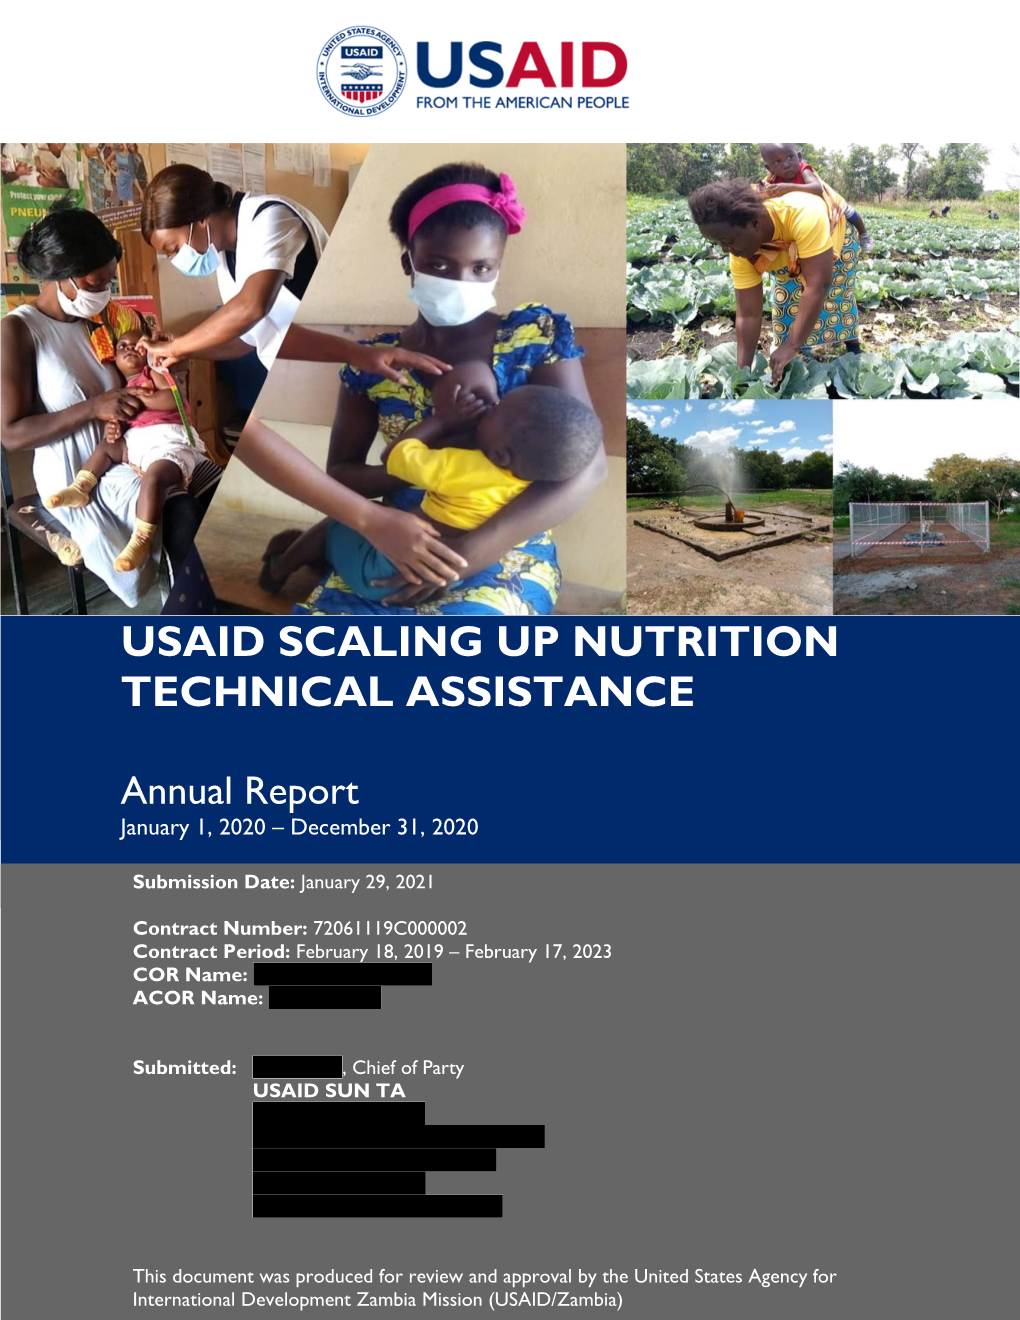 Usaid Scaling up Nutrition Technical Assistance